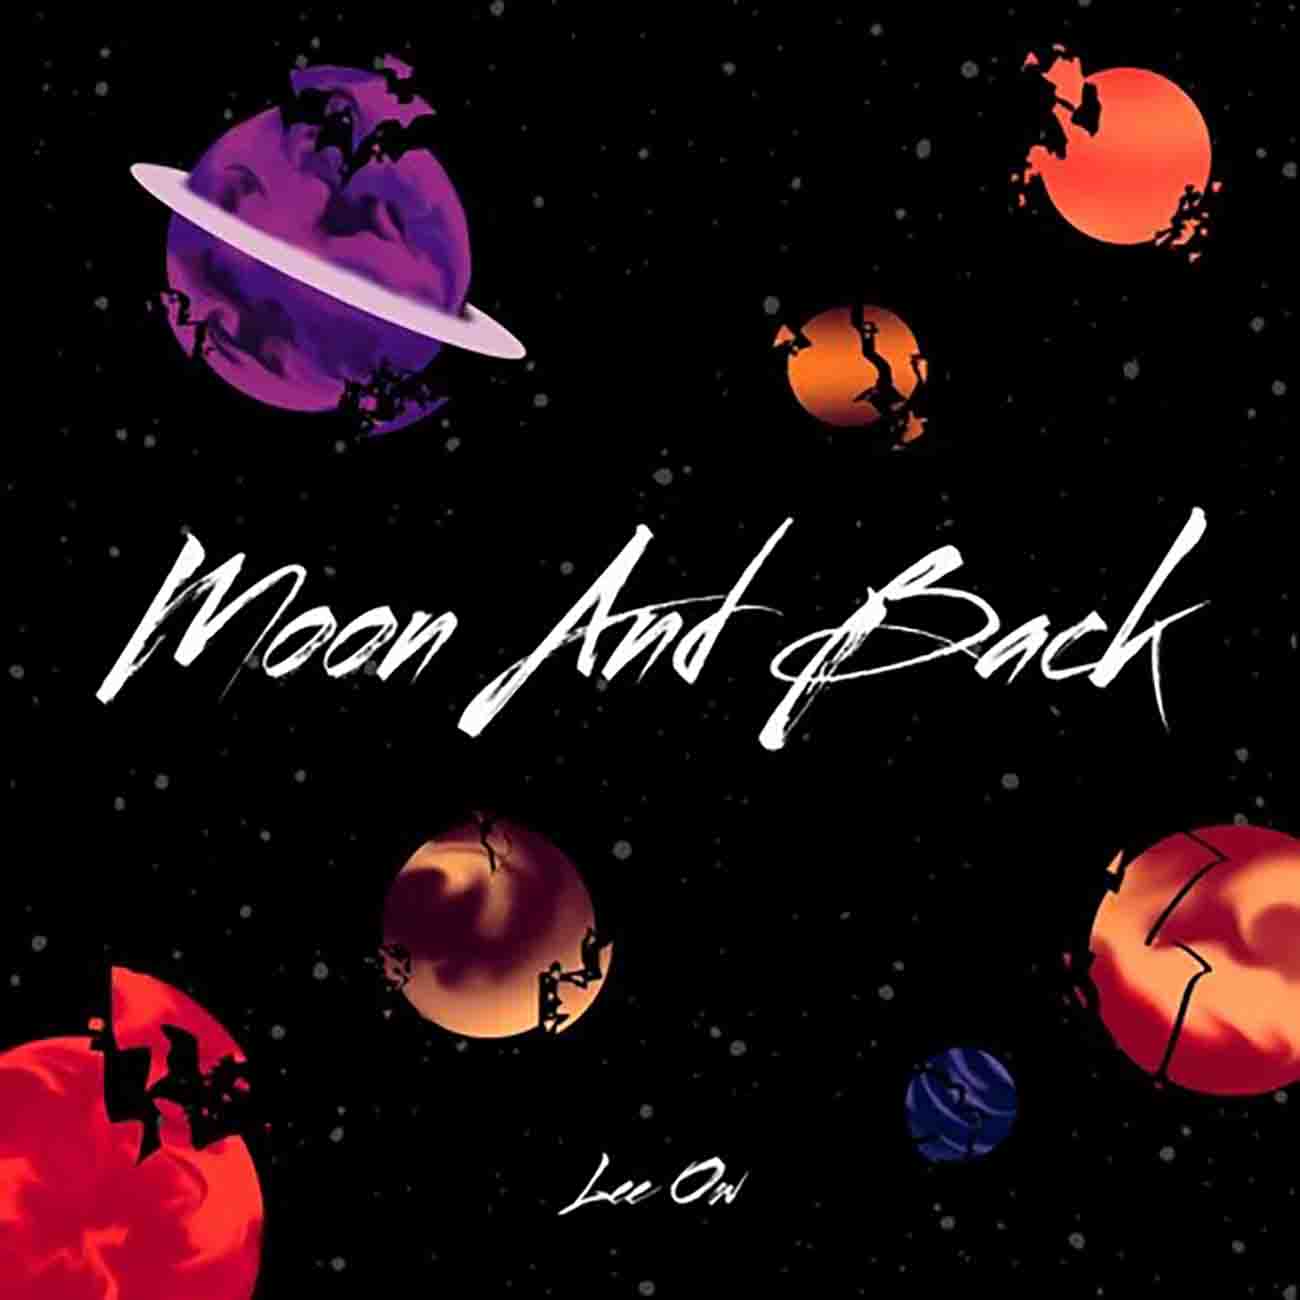 Lee Ow - Moon and Back